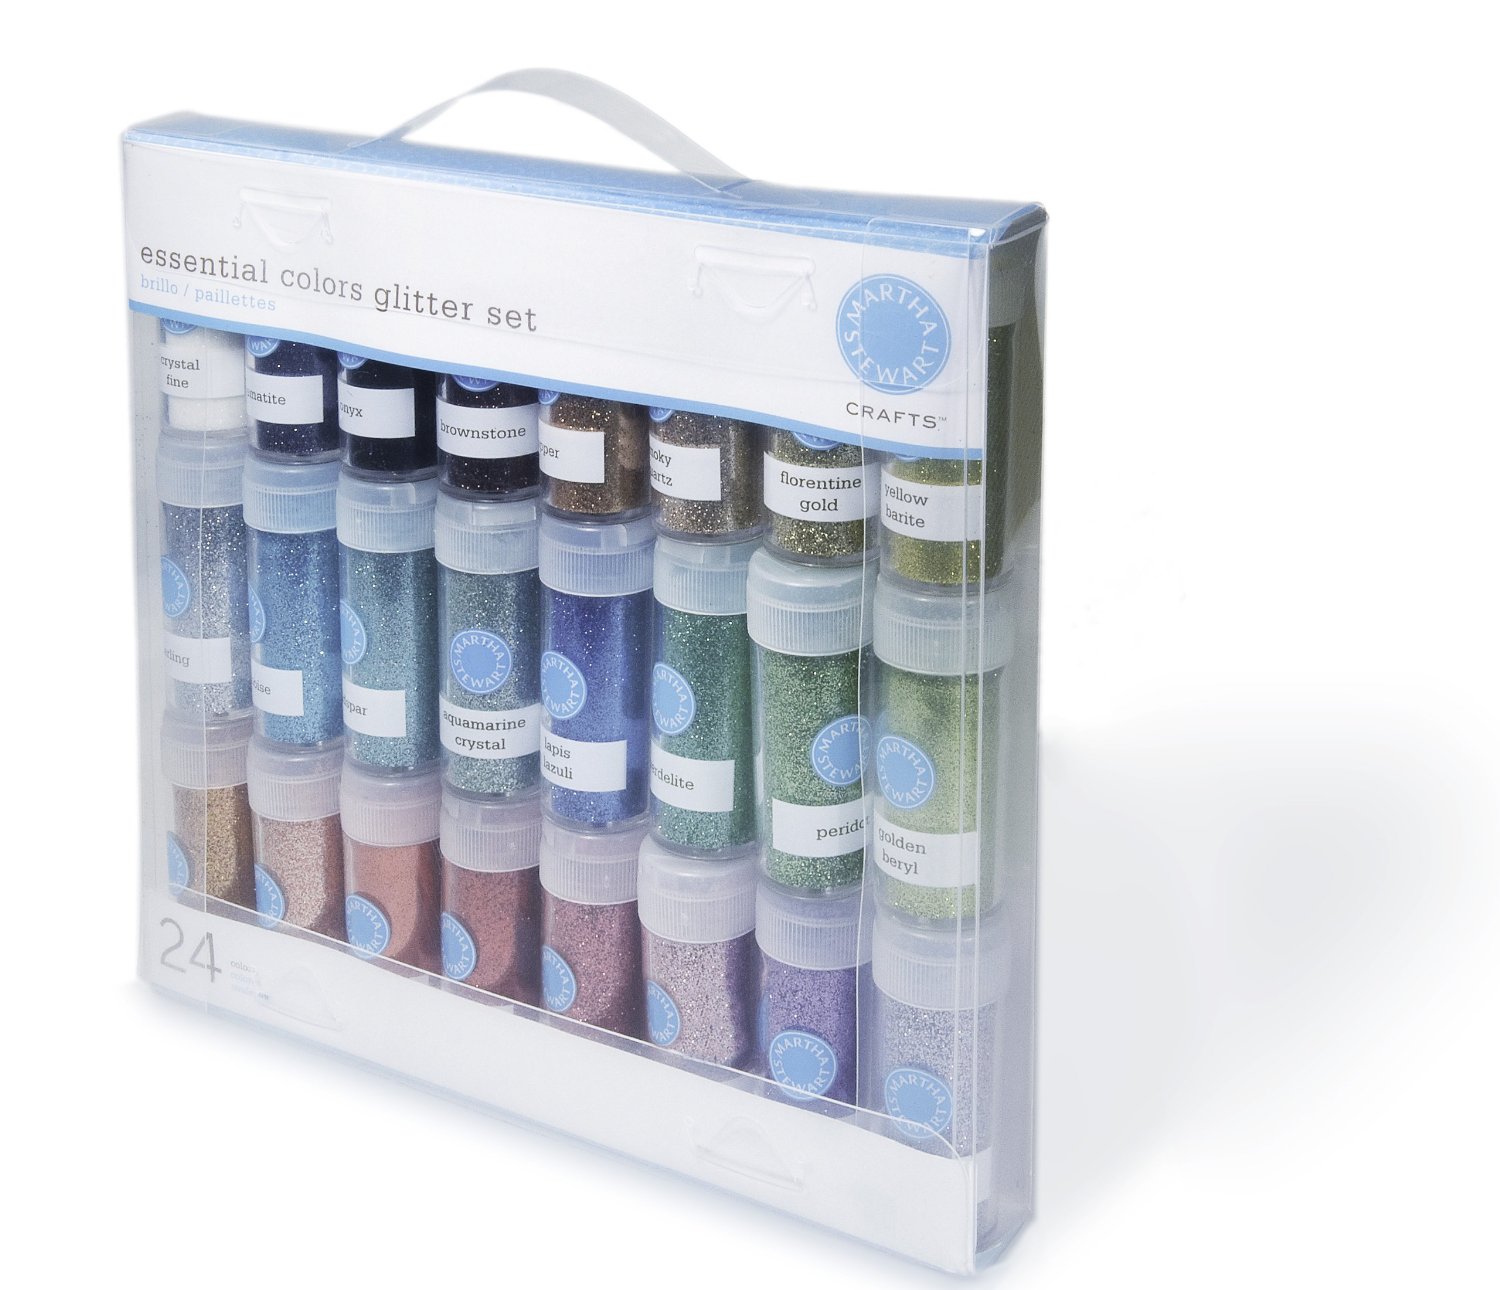 glitter - the perfect gift for crafters